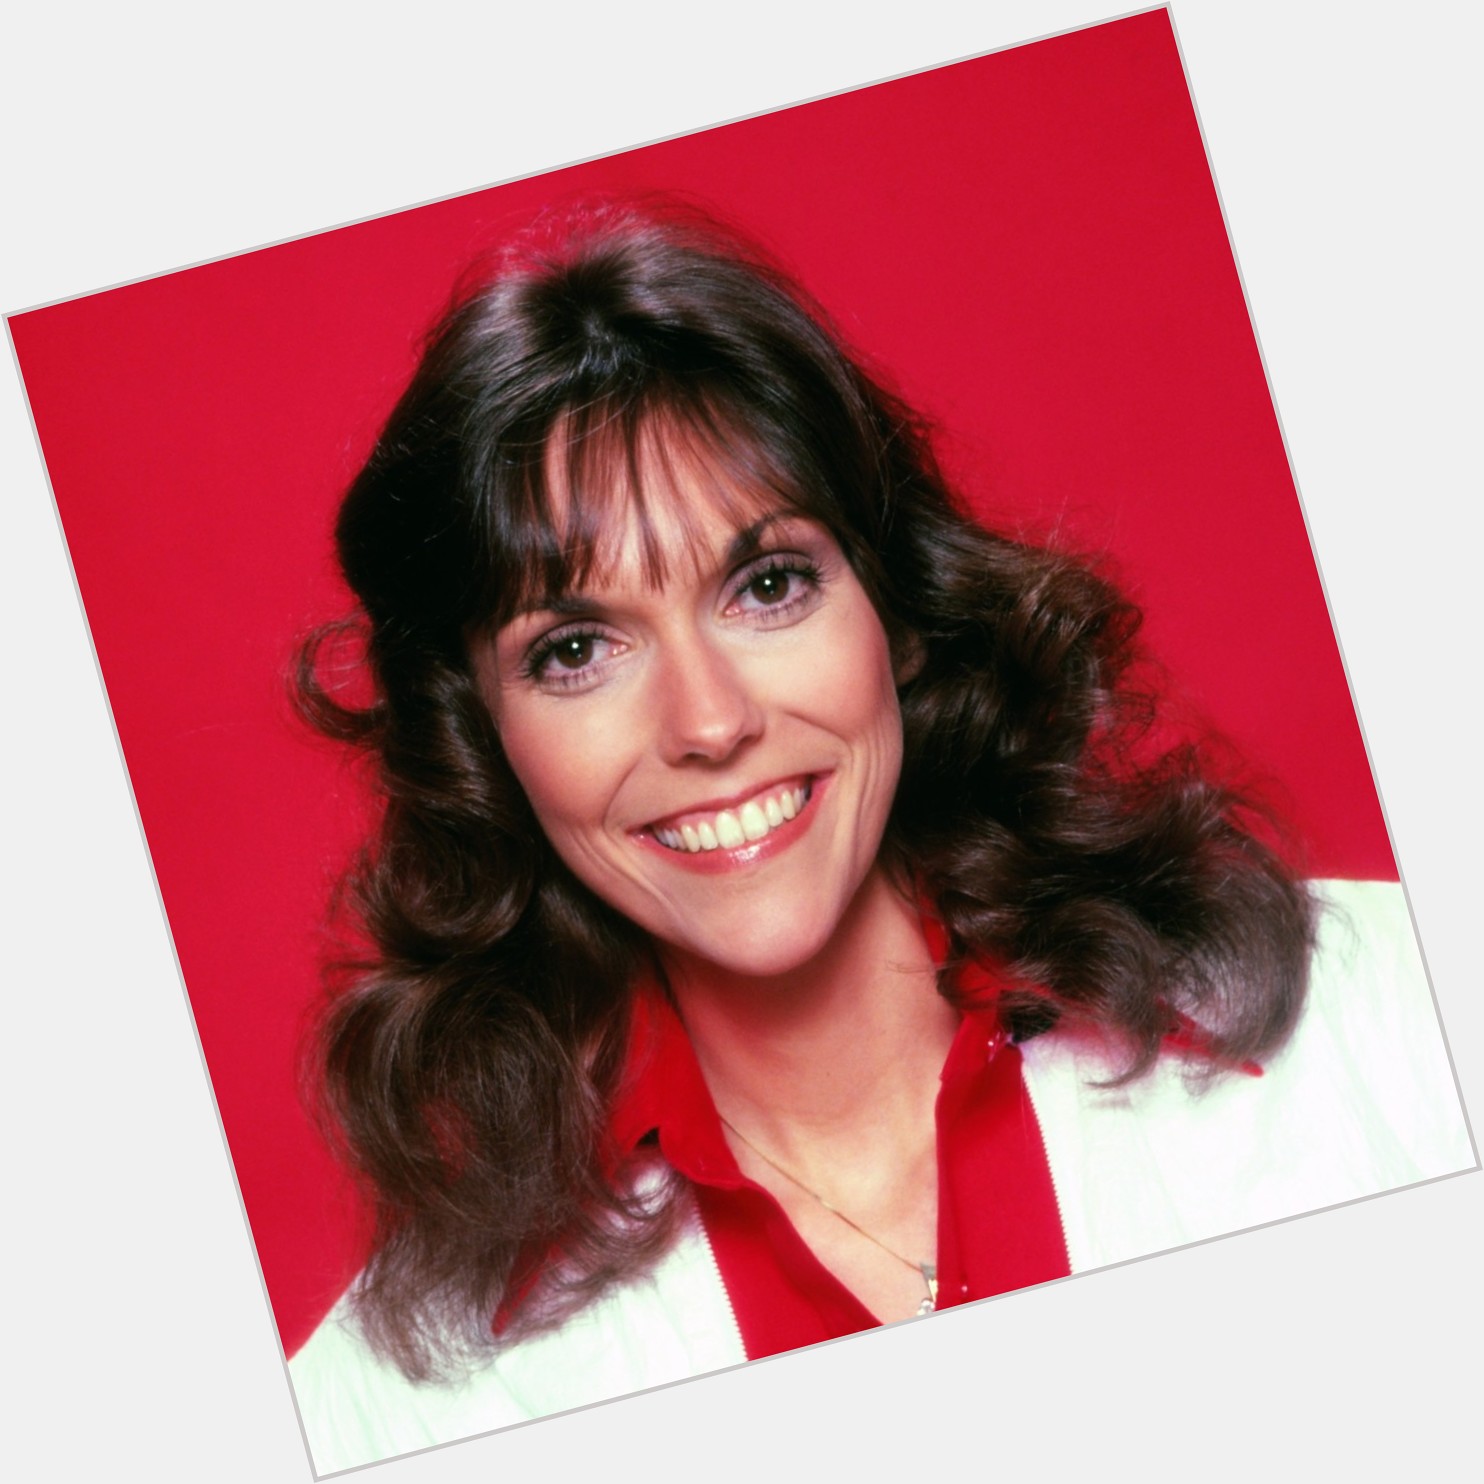 Happy Birthday to Karen Carpenter, who would have turned 70 today. 